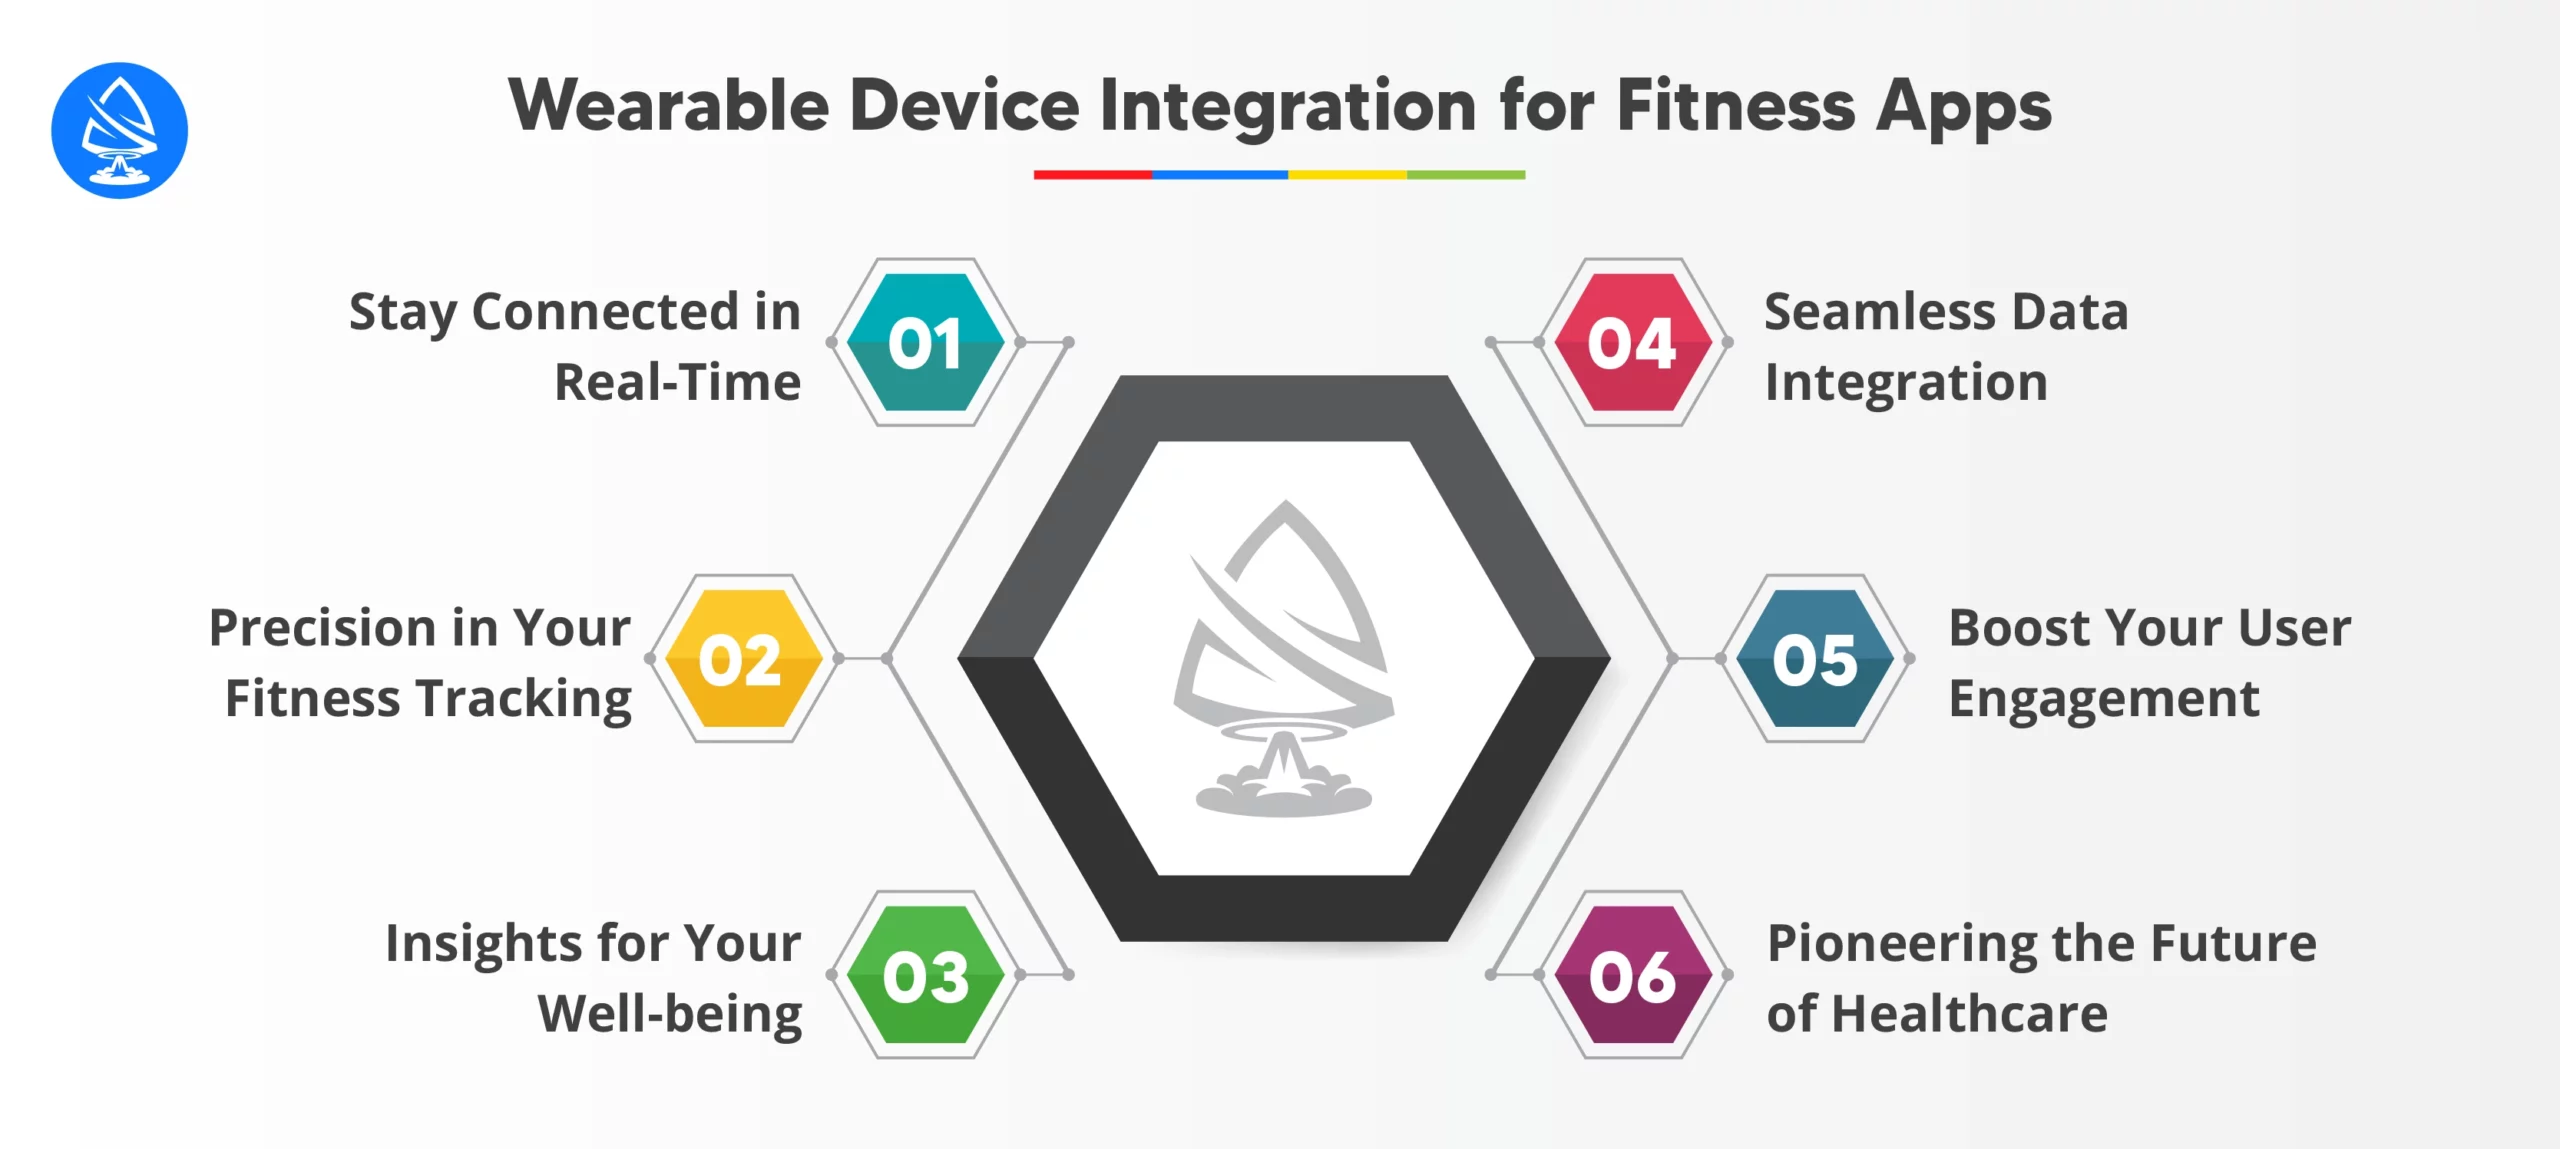 Wearable Device Integration for Fitness Apps